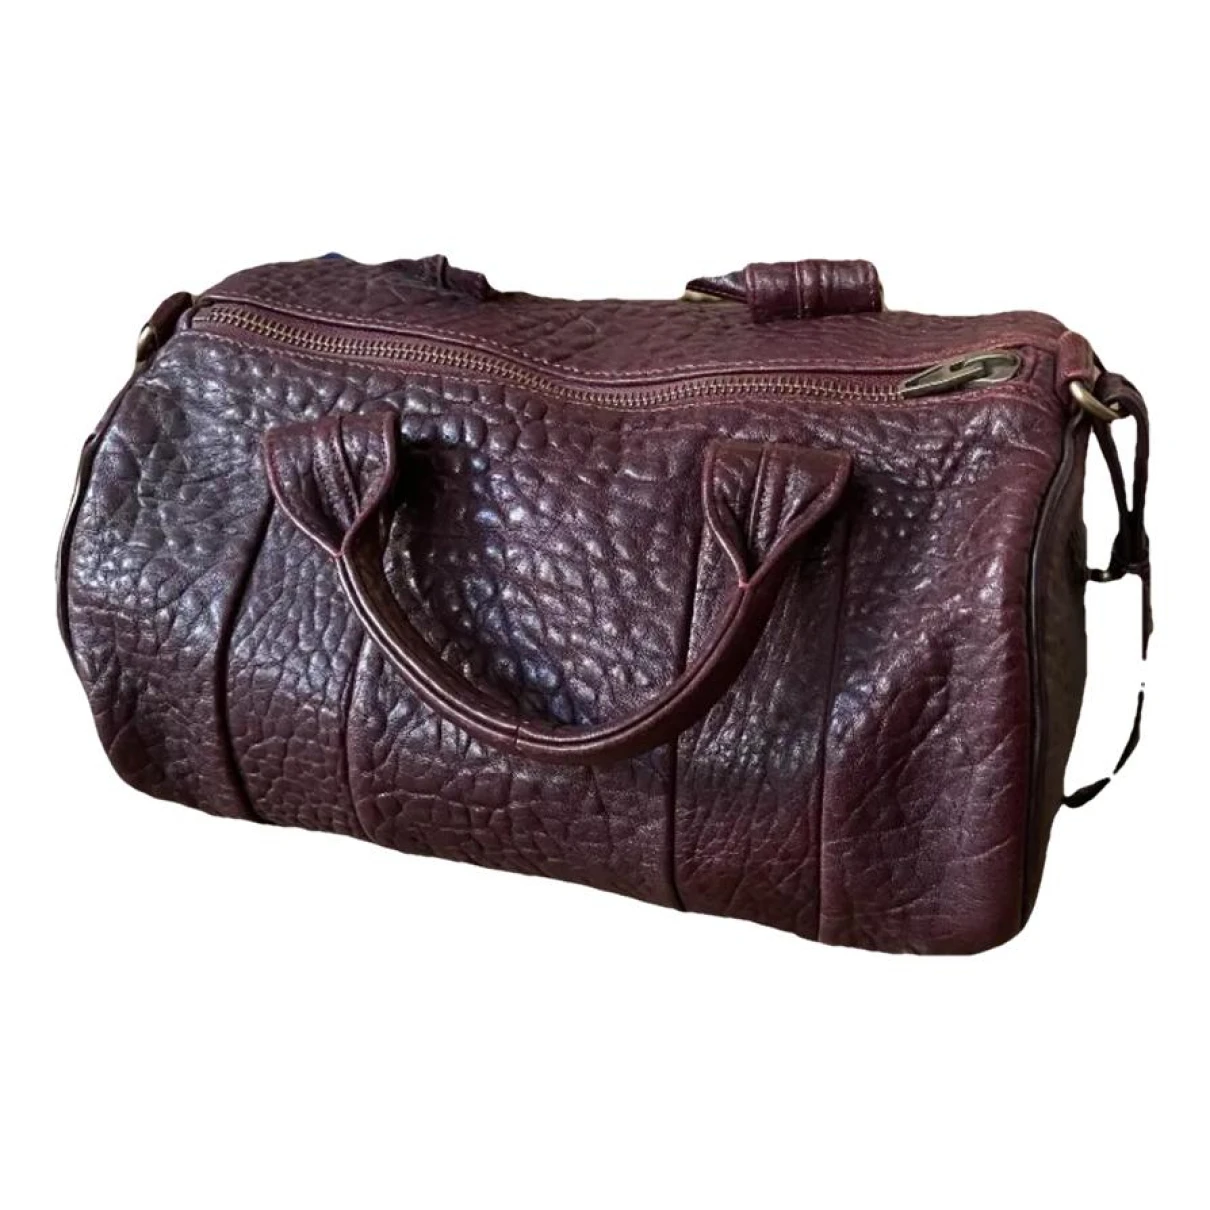 Pre-owned Alexander Wang Rocco Leather Handbag In Burgundy